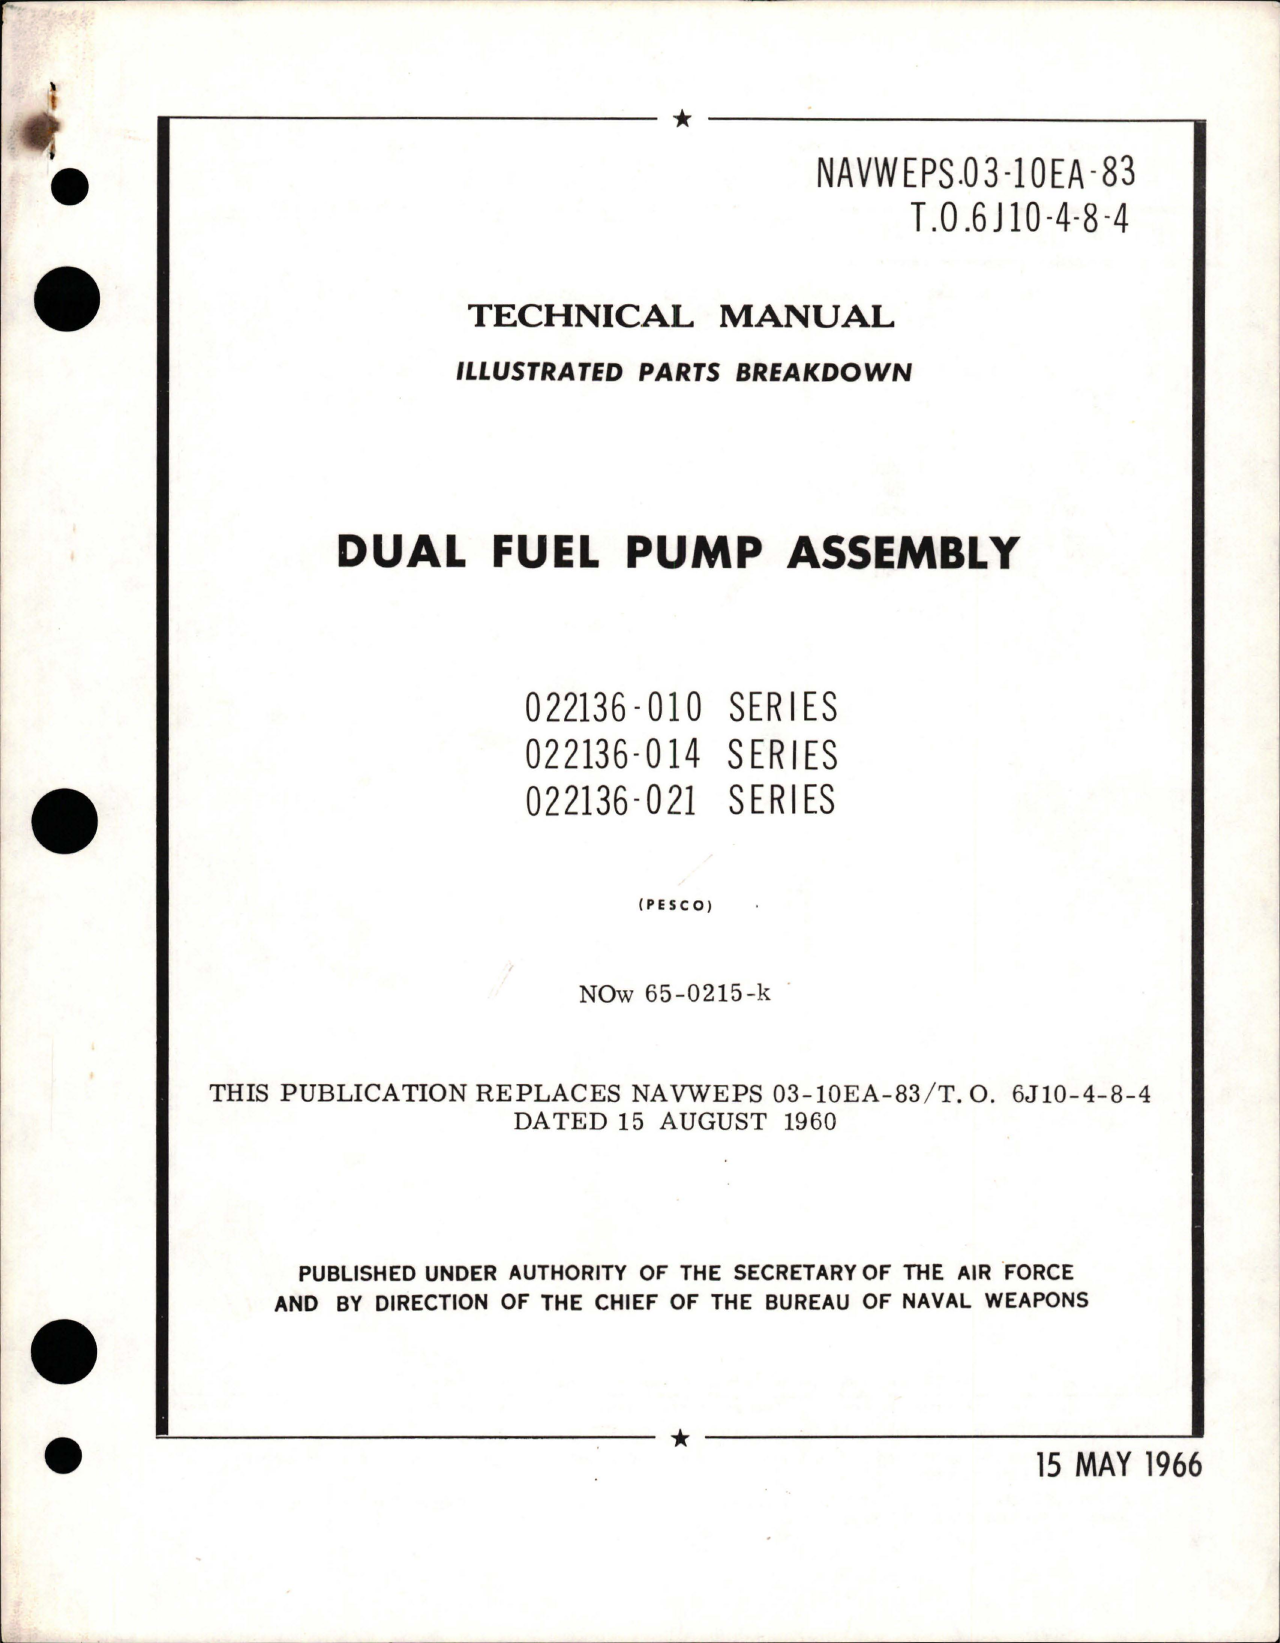 Sample page 1 from AirCorps Library document: Illustrated Parts Breakdown for Dual Fuel Pump Assembly - Model 022136-010, 022136-014, and 022136-021